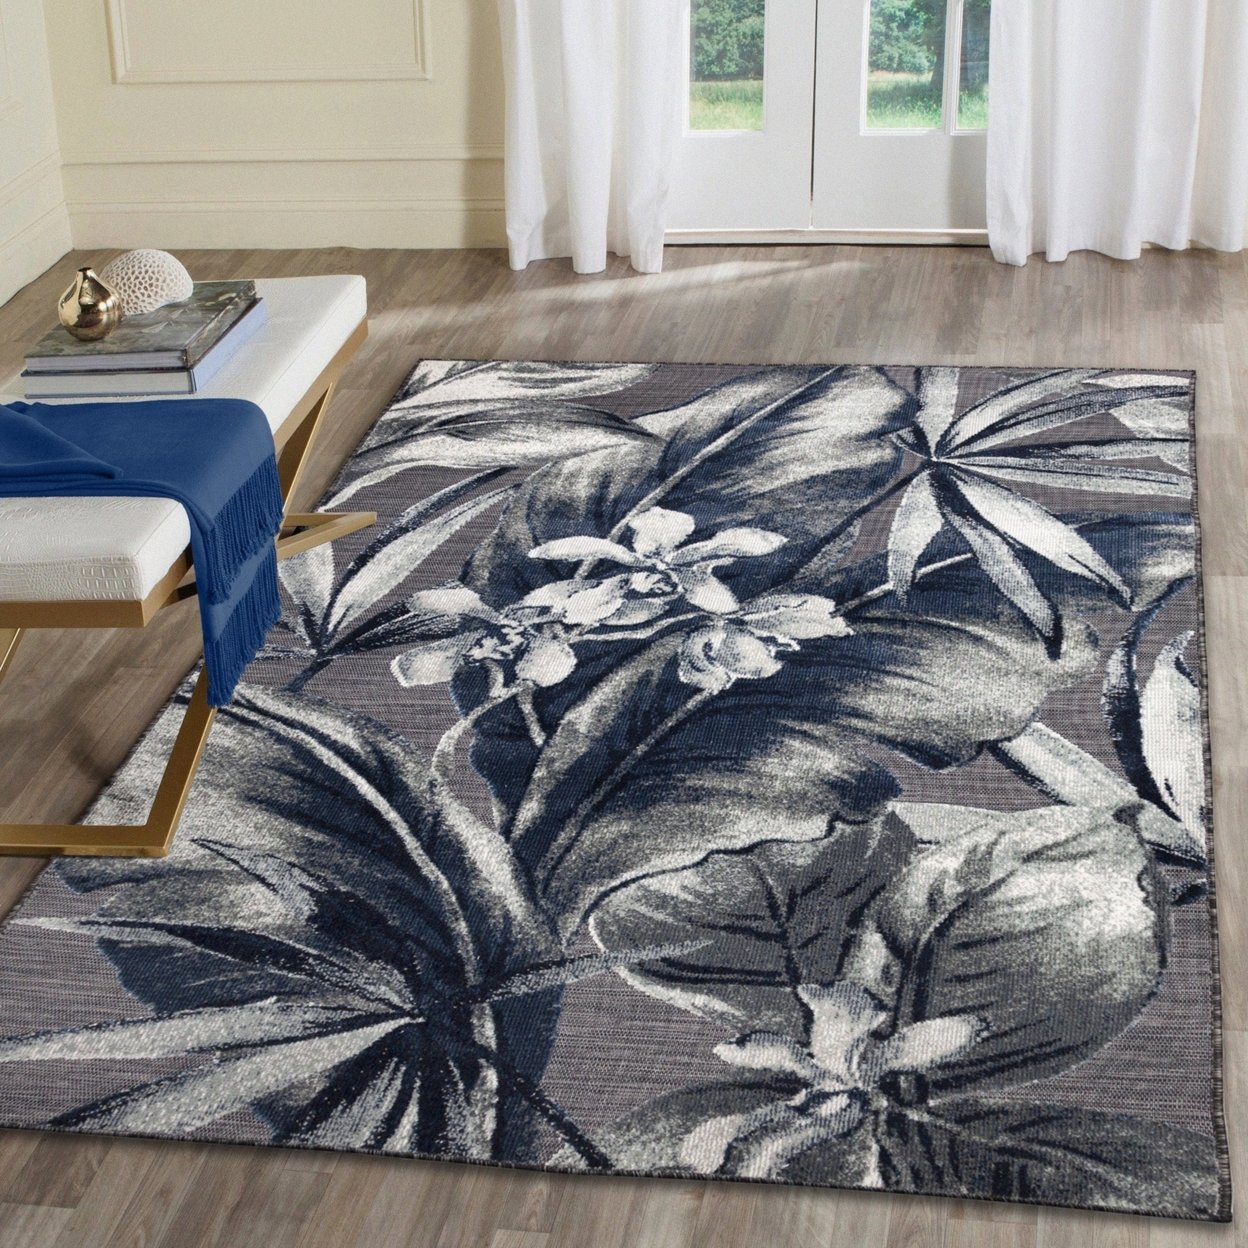 Liora Manne Canyon Tropical Leaf Indoor Outdoor Area Rug Charcoal - 6'5 X 9'4